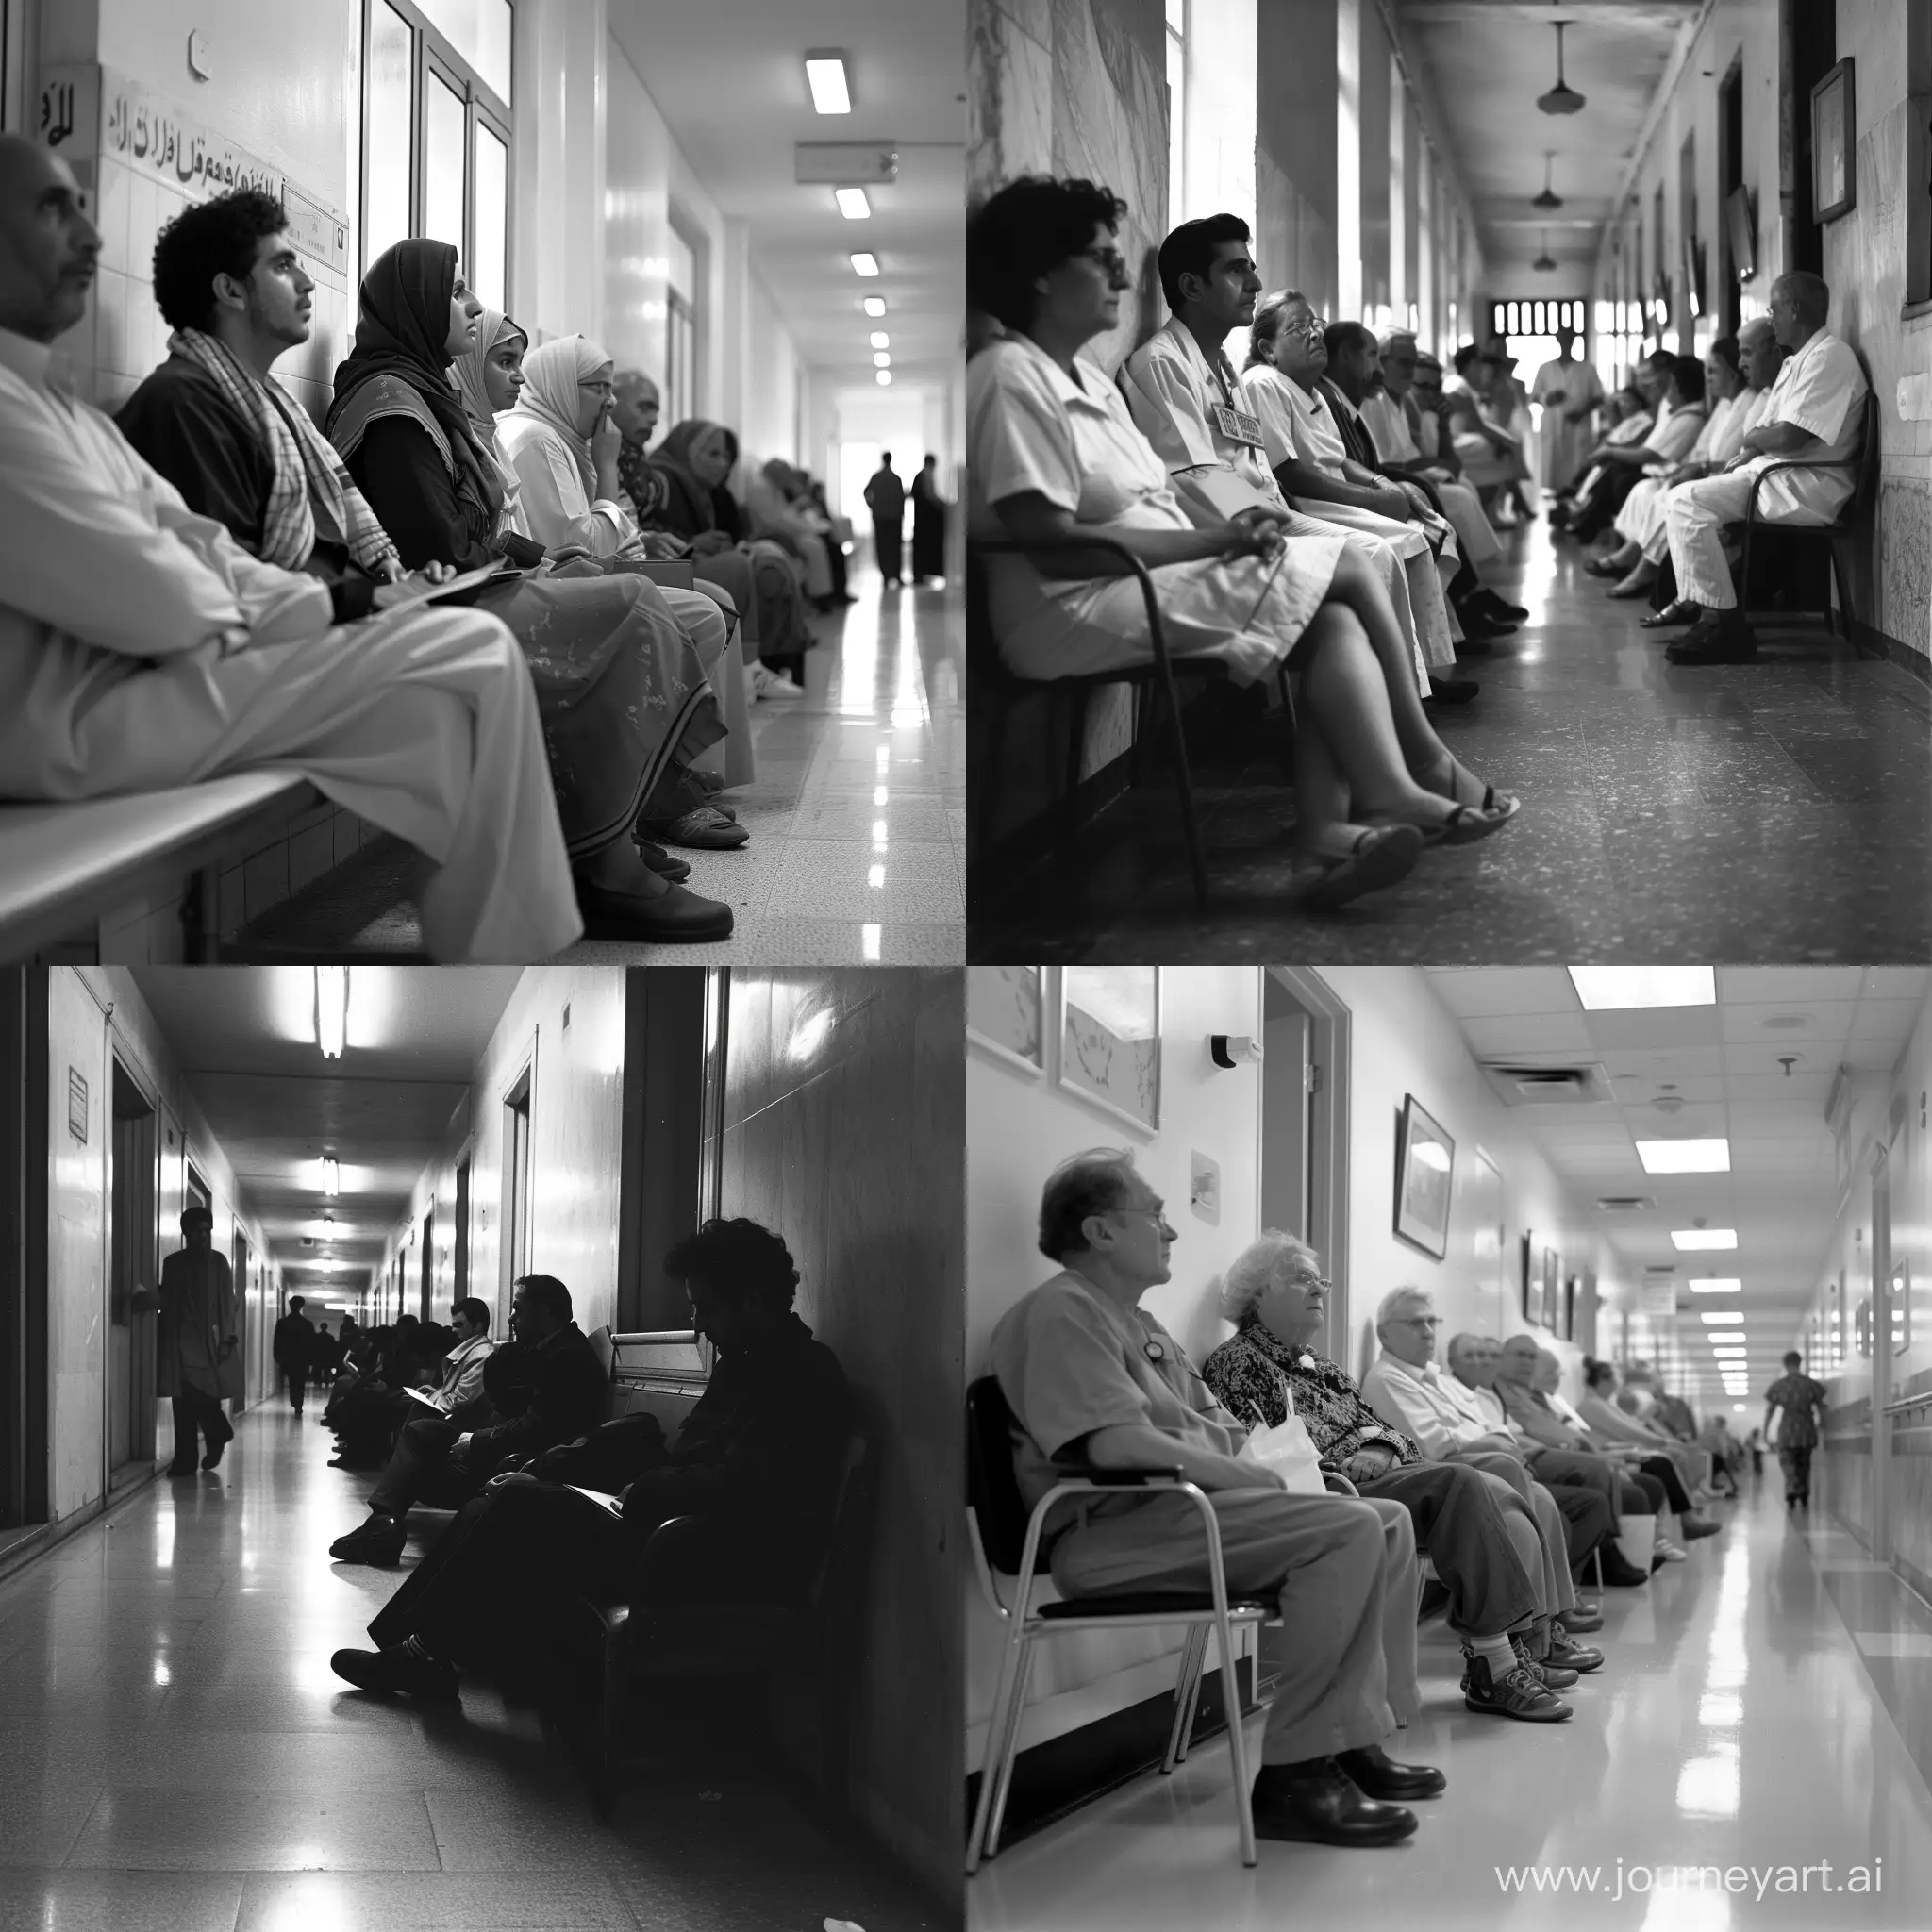 Patients-Waiting-in-Hospital-Corridor-for-Doctor-Consultation